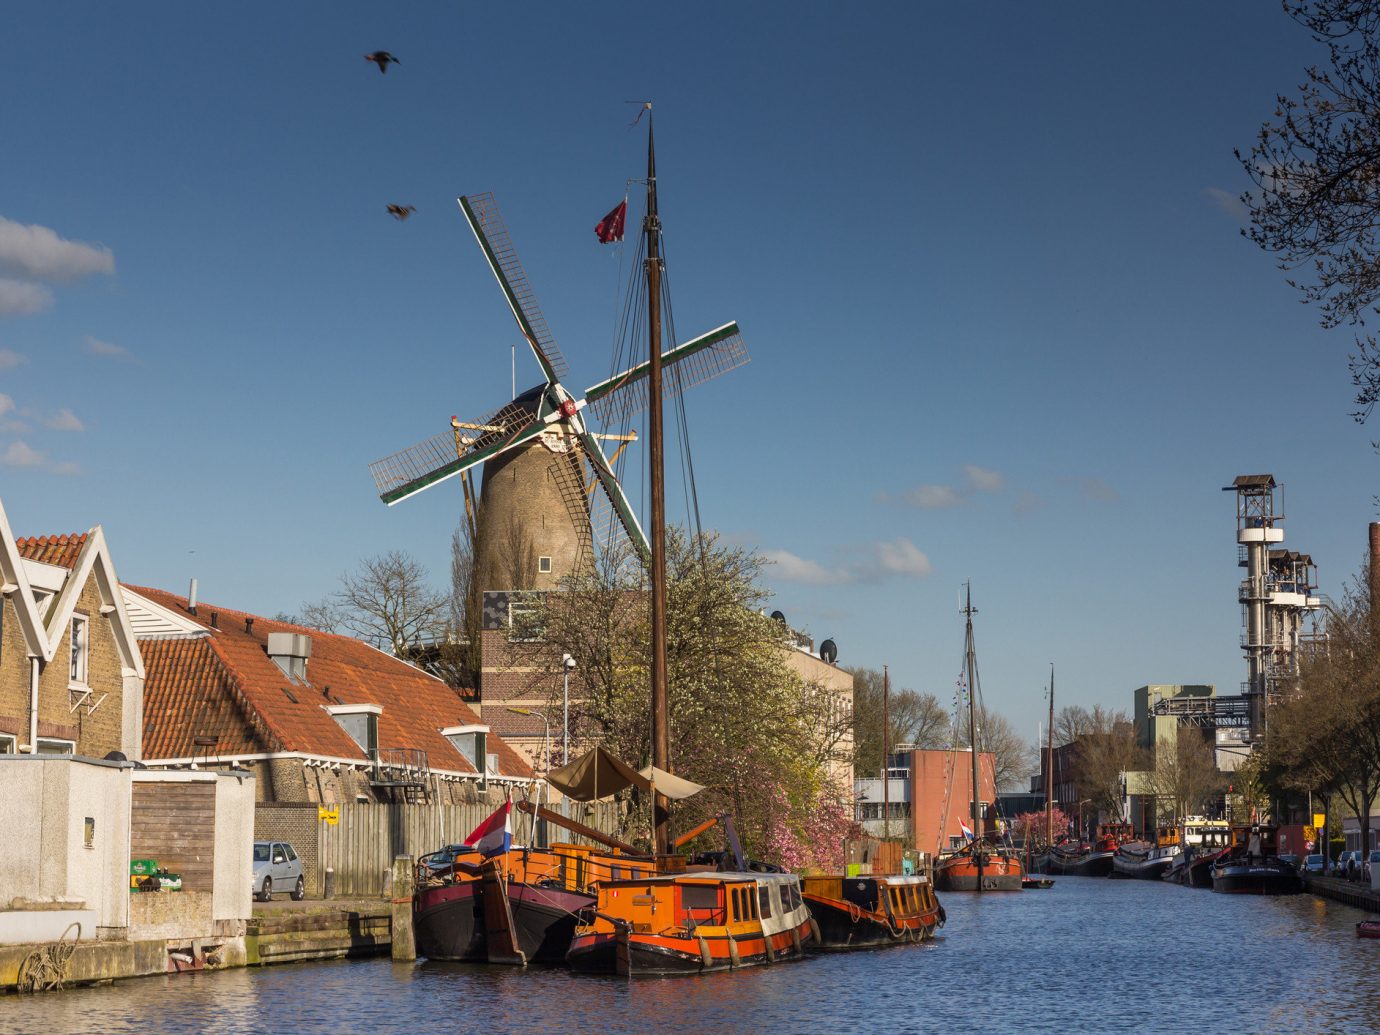 Trip Ideas outdoor sky water waterway Boat Canal tree building City River windmill plant evening channel